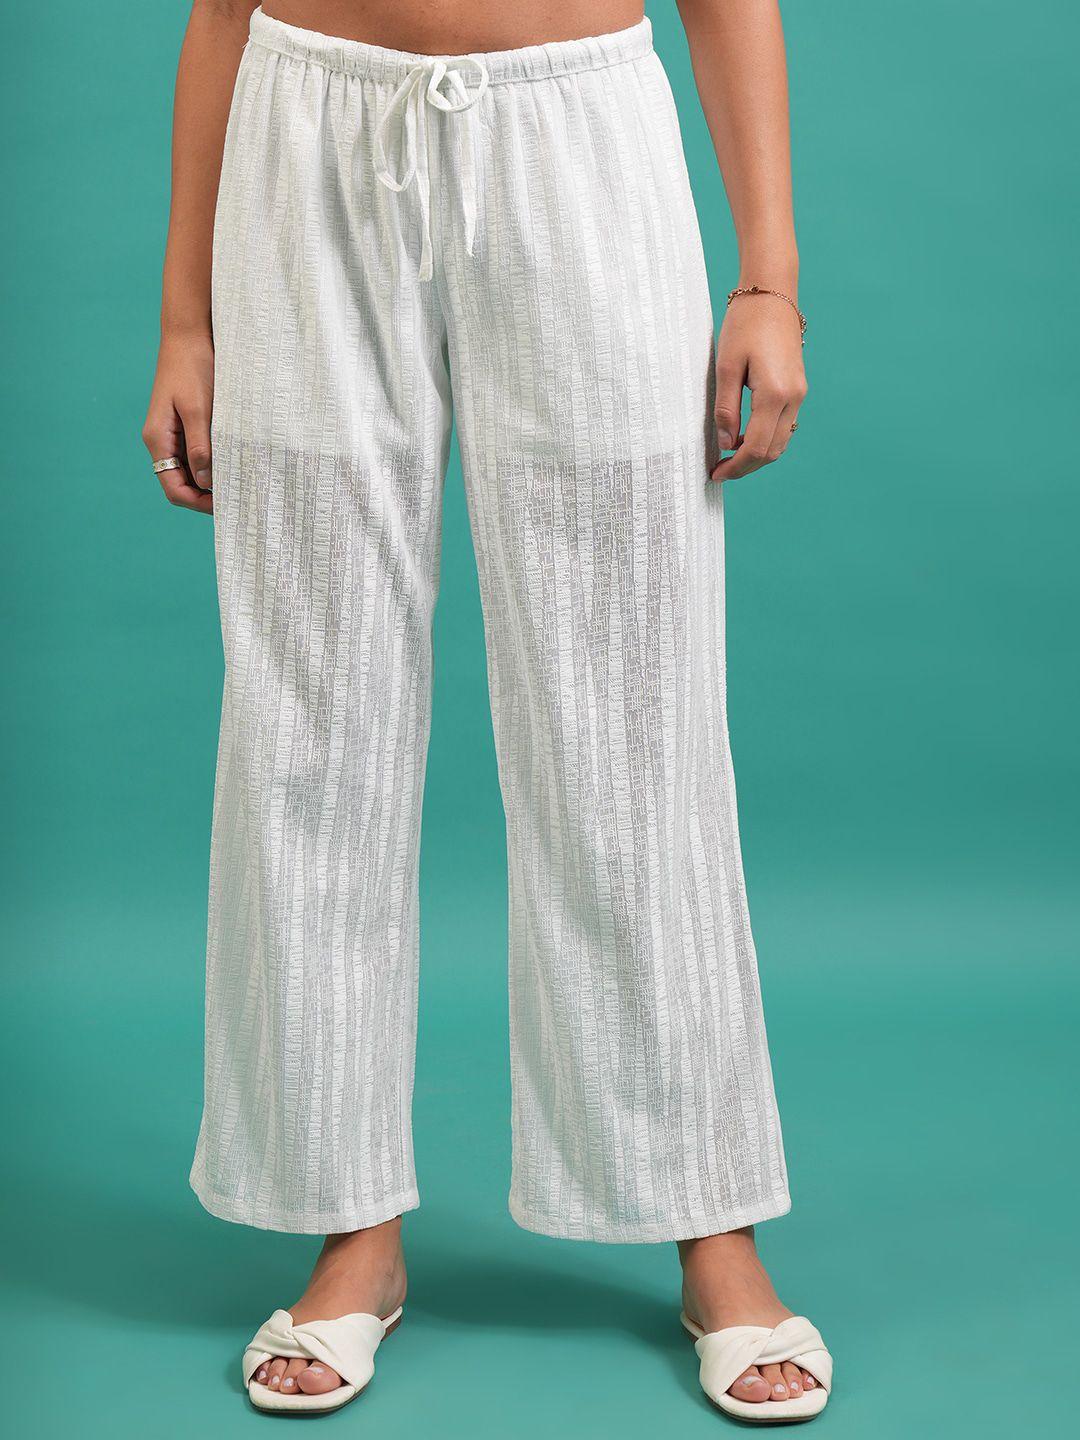 tokyo talkies women white striped flared parallel trousers